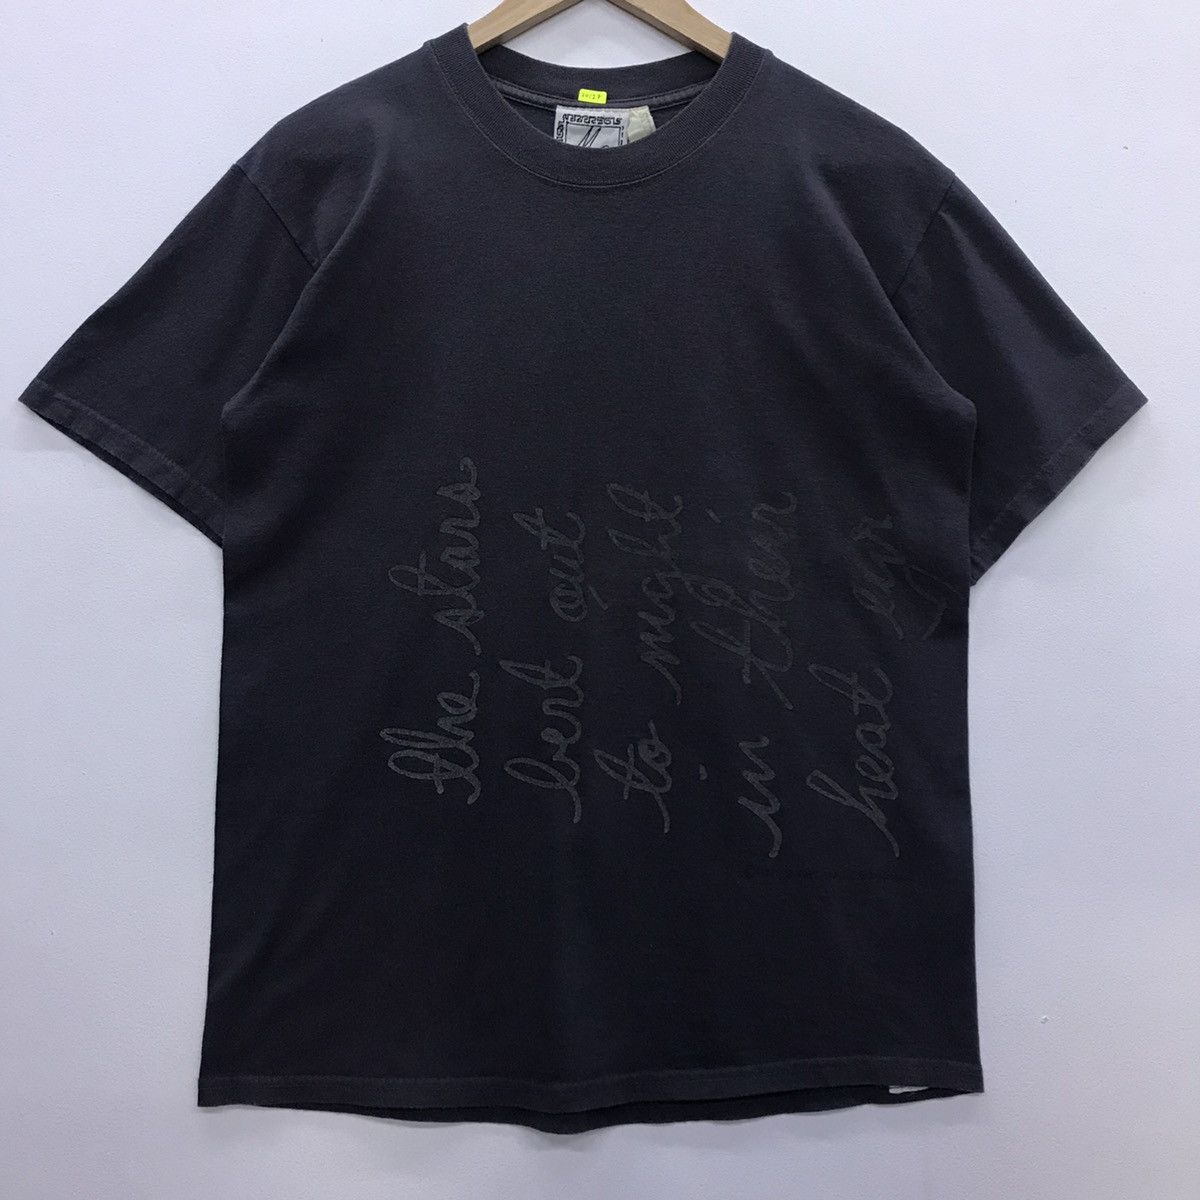 Japanese Brand Rare!! Mark Gonzales Skateboard tee Size US M / EU 48-50 / 2 - 2 Preview